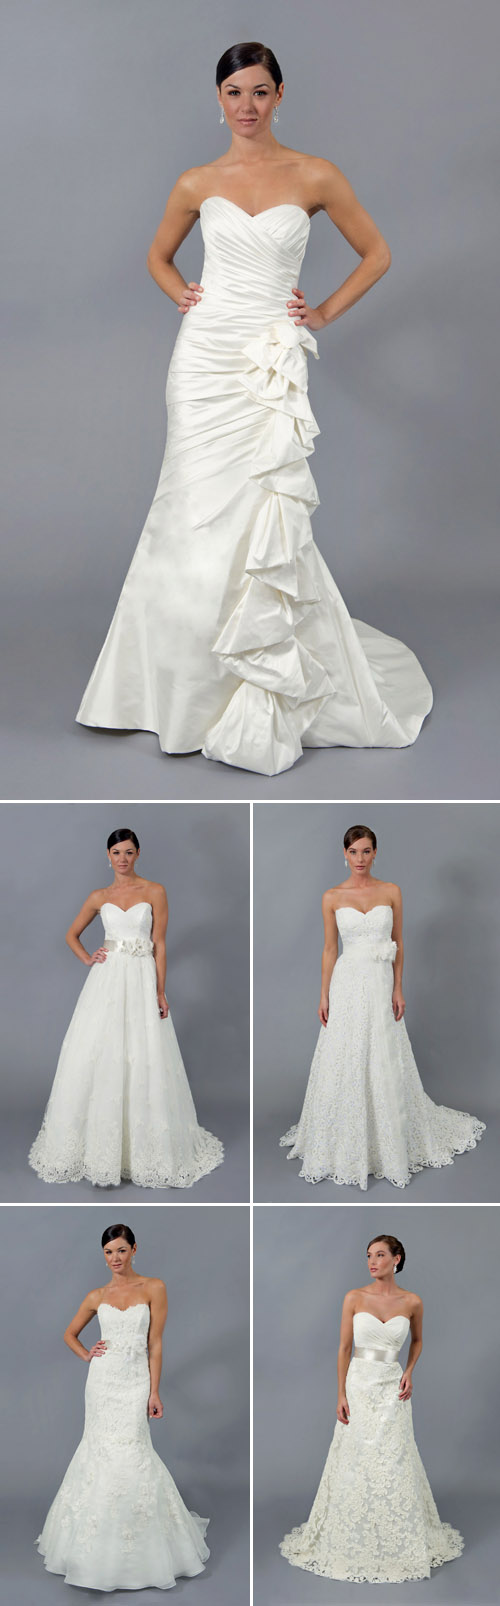 pretty lace wedding dresses from Modern Trousseau Spring 2012 colleciton